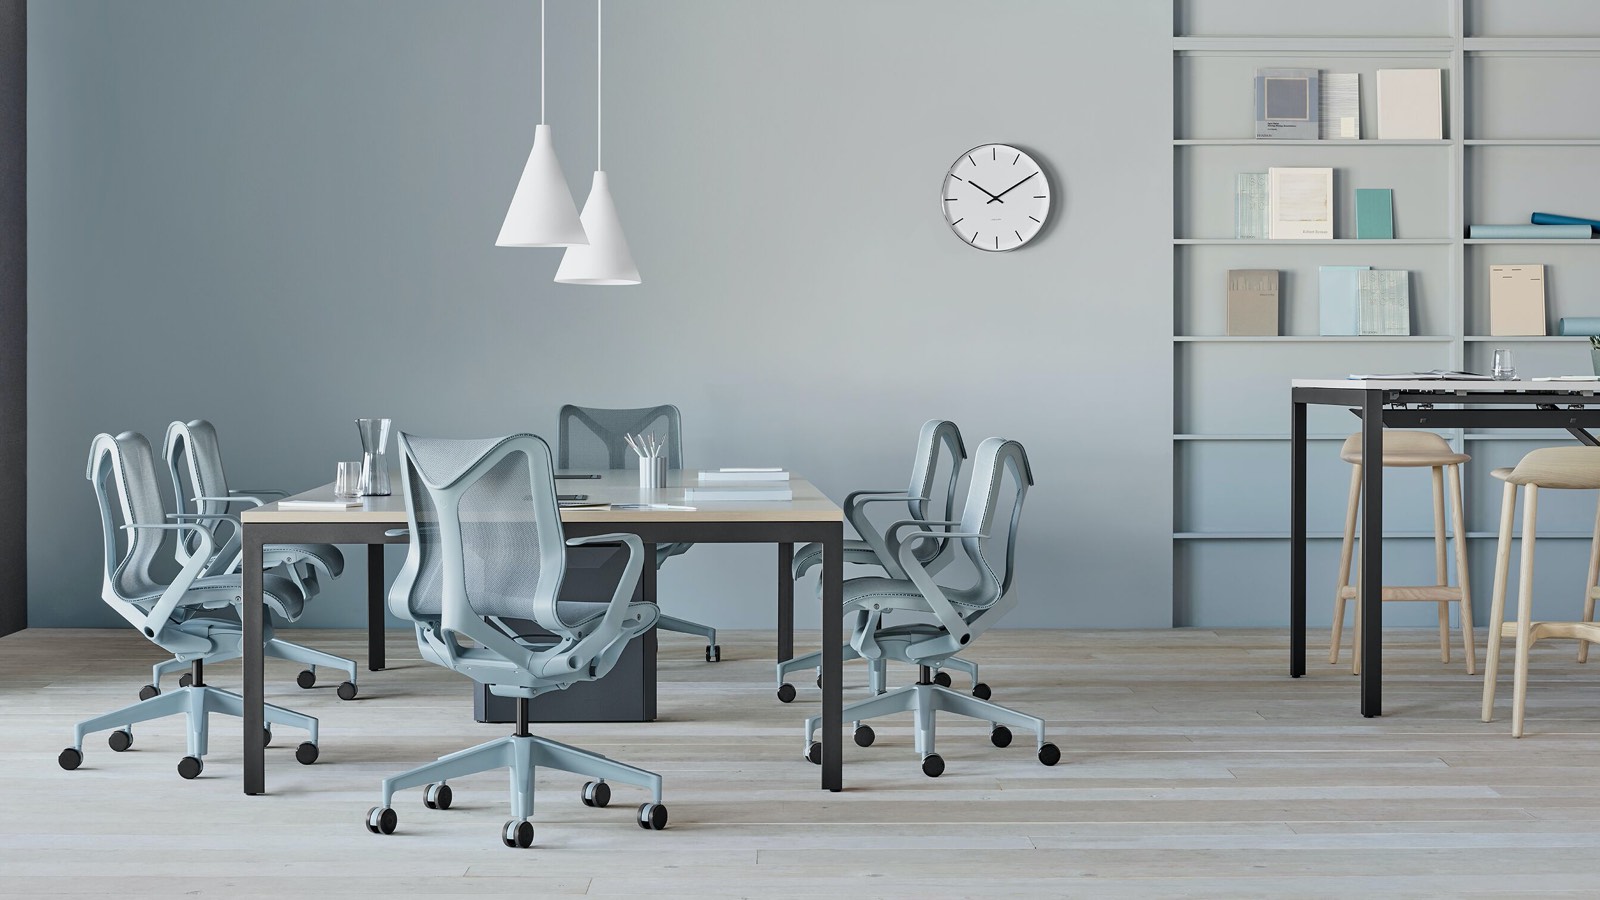 Several low-back Cosm Chairs in light blue glacier finish surround a Layout Studio conference table in an airy open office space. Select to search for a Herman Miller dealer.